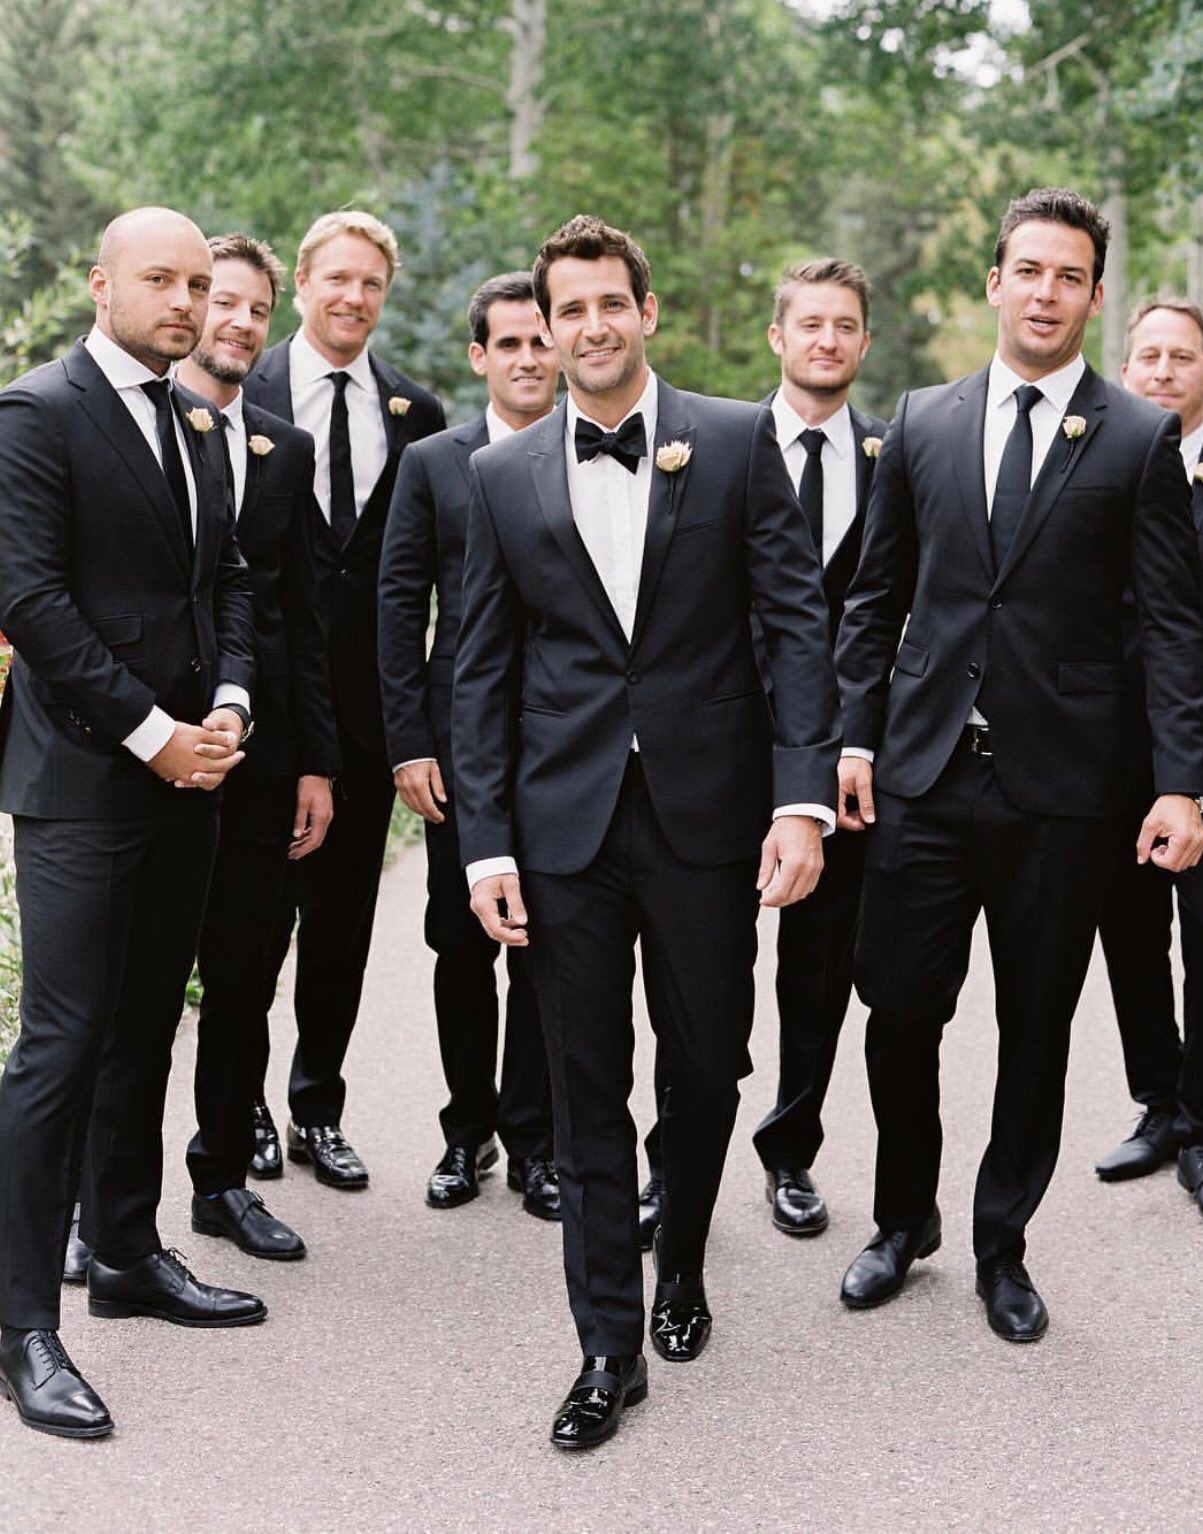 Groom and groomsmen in perfectly tailored bespoke tuxedos